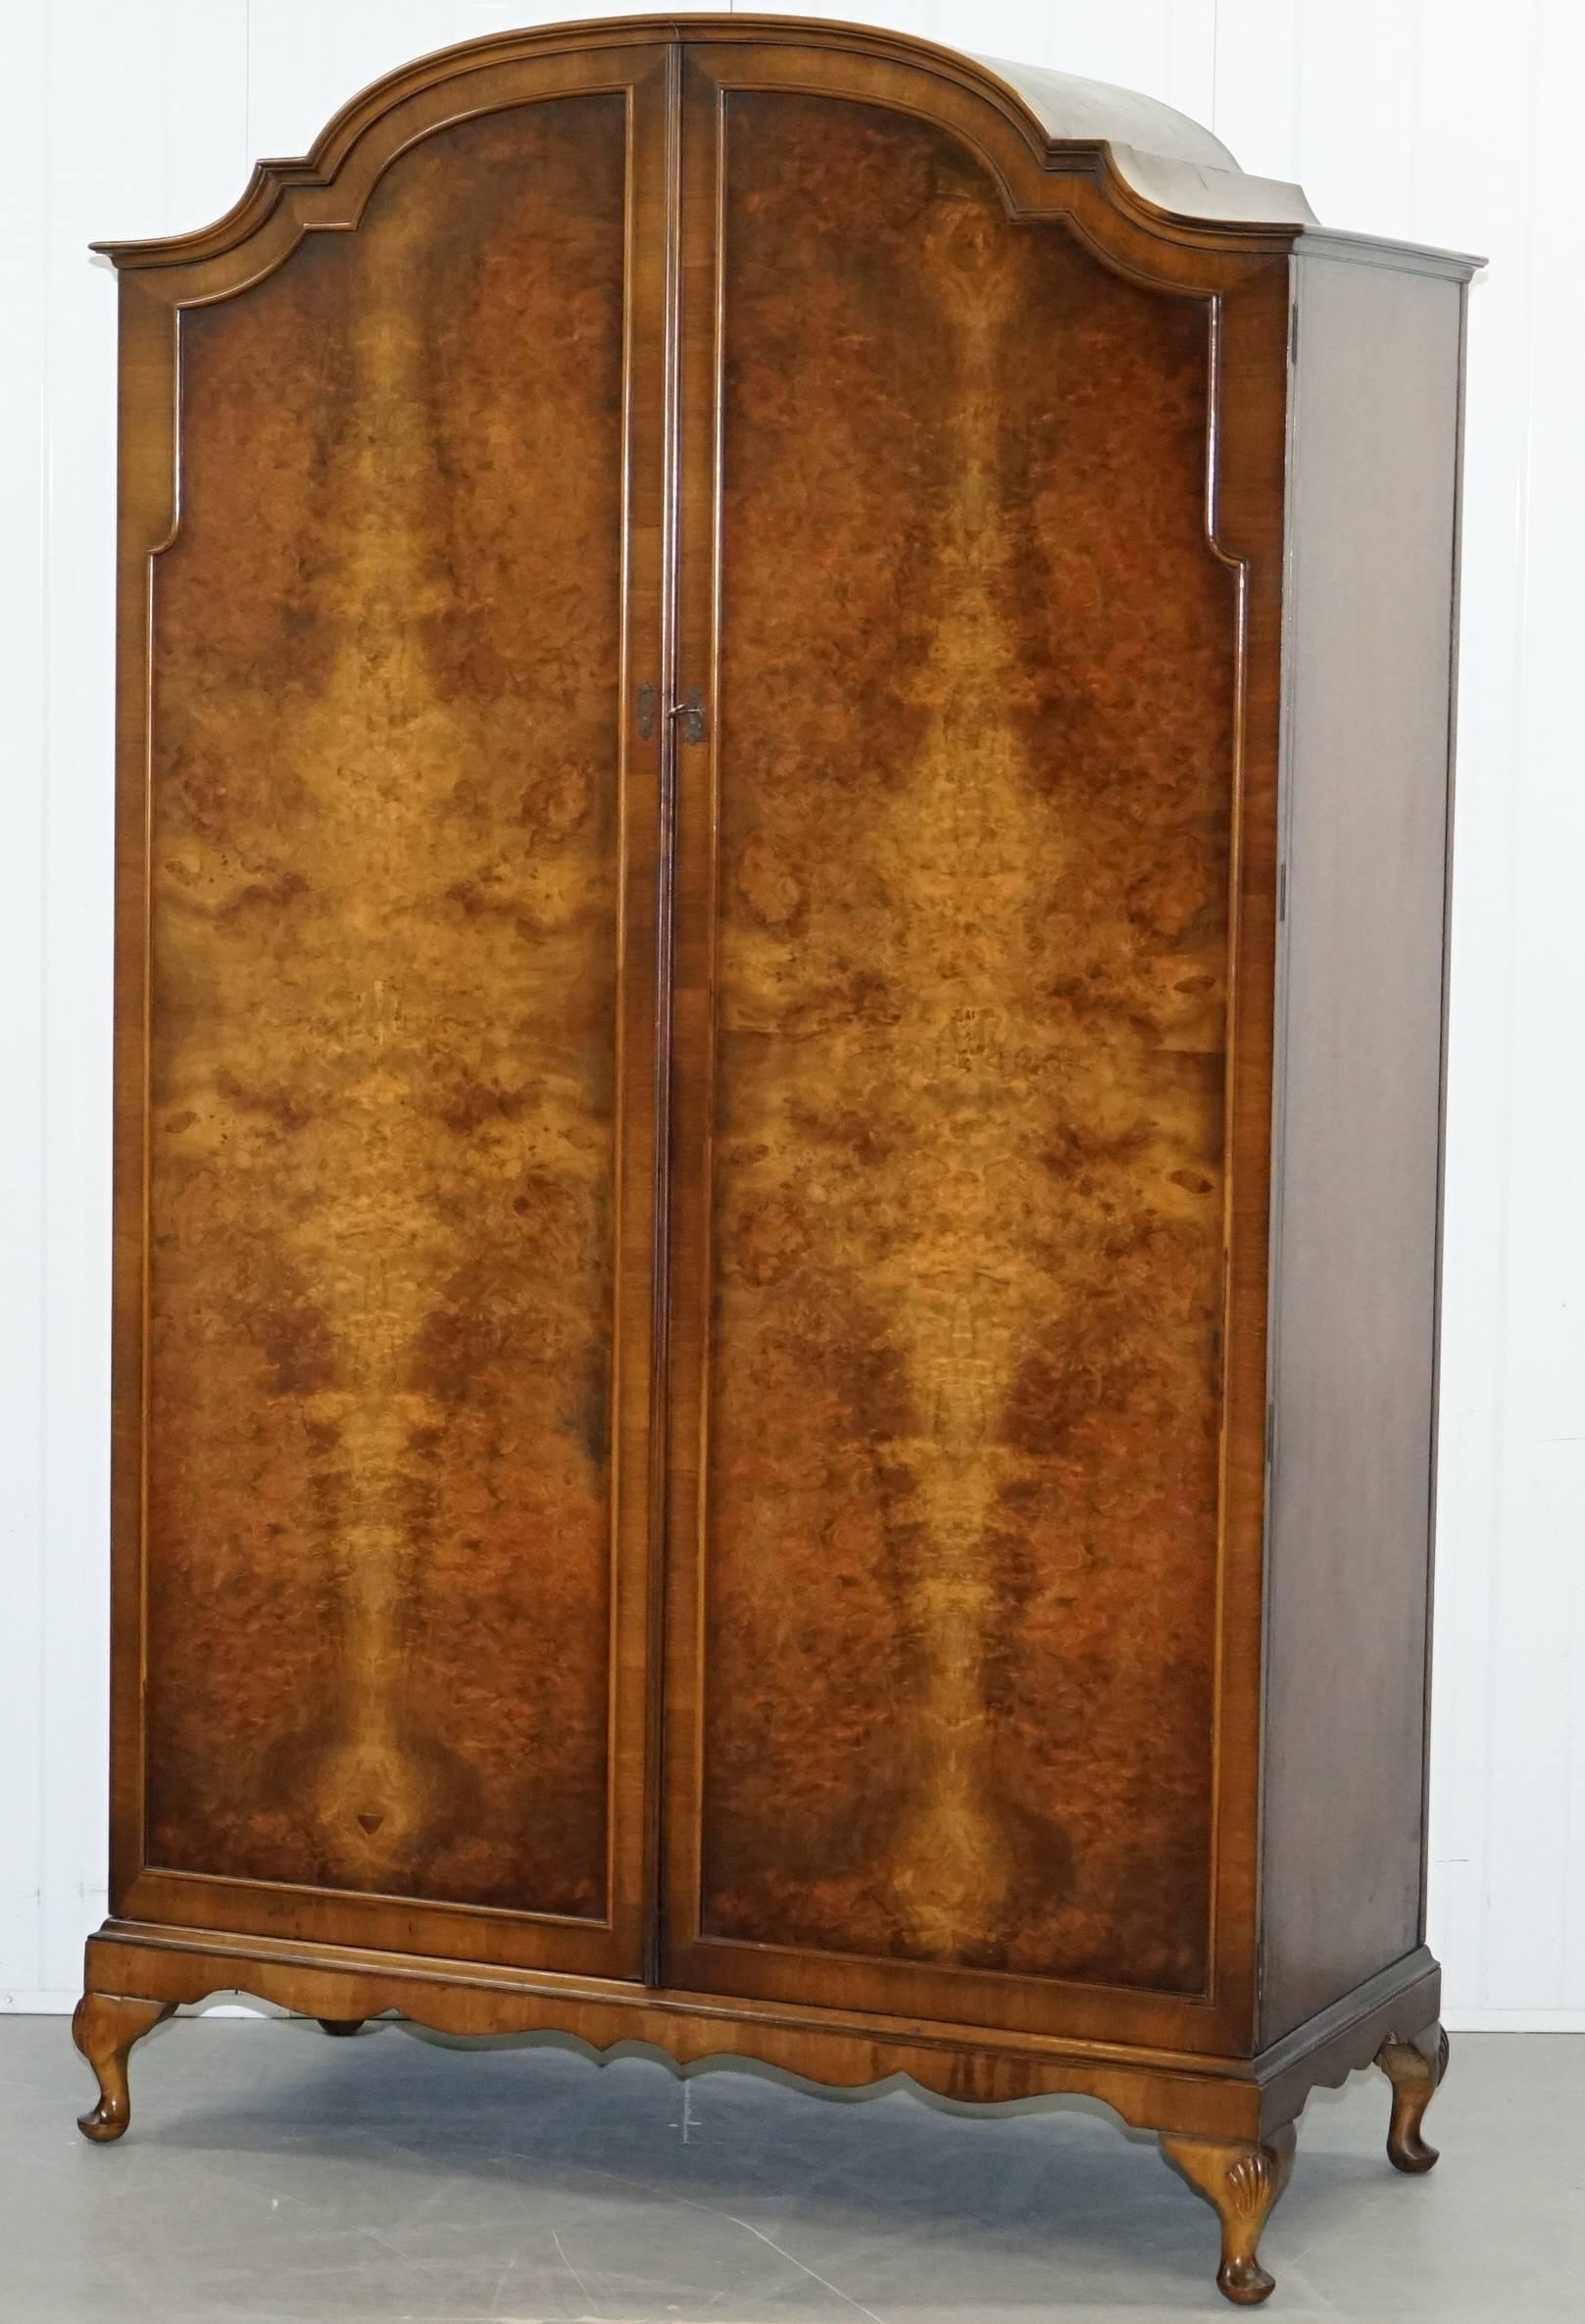 We are delighted to offer for sale this lovely handmade in England flamed walnut double wardrobe with cabriolet legs 

A very good looking and well-made piece in period condition, this wardrobe offers storage for hanging full-length items on the